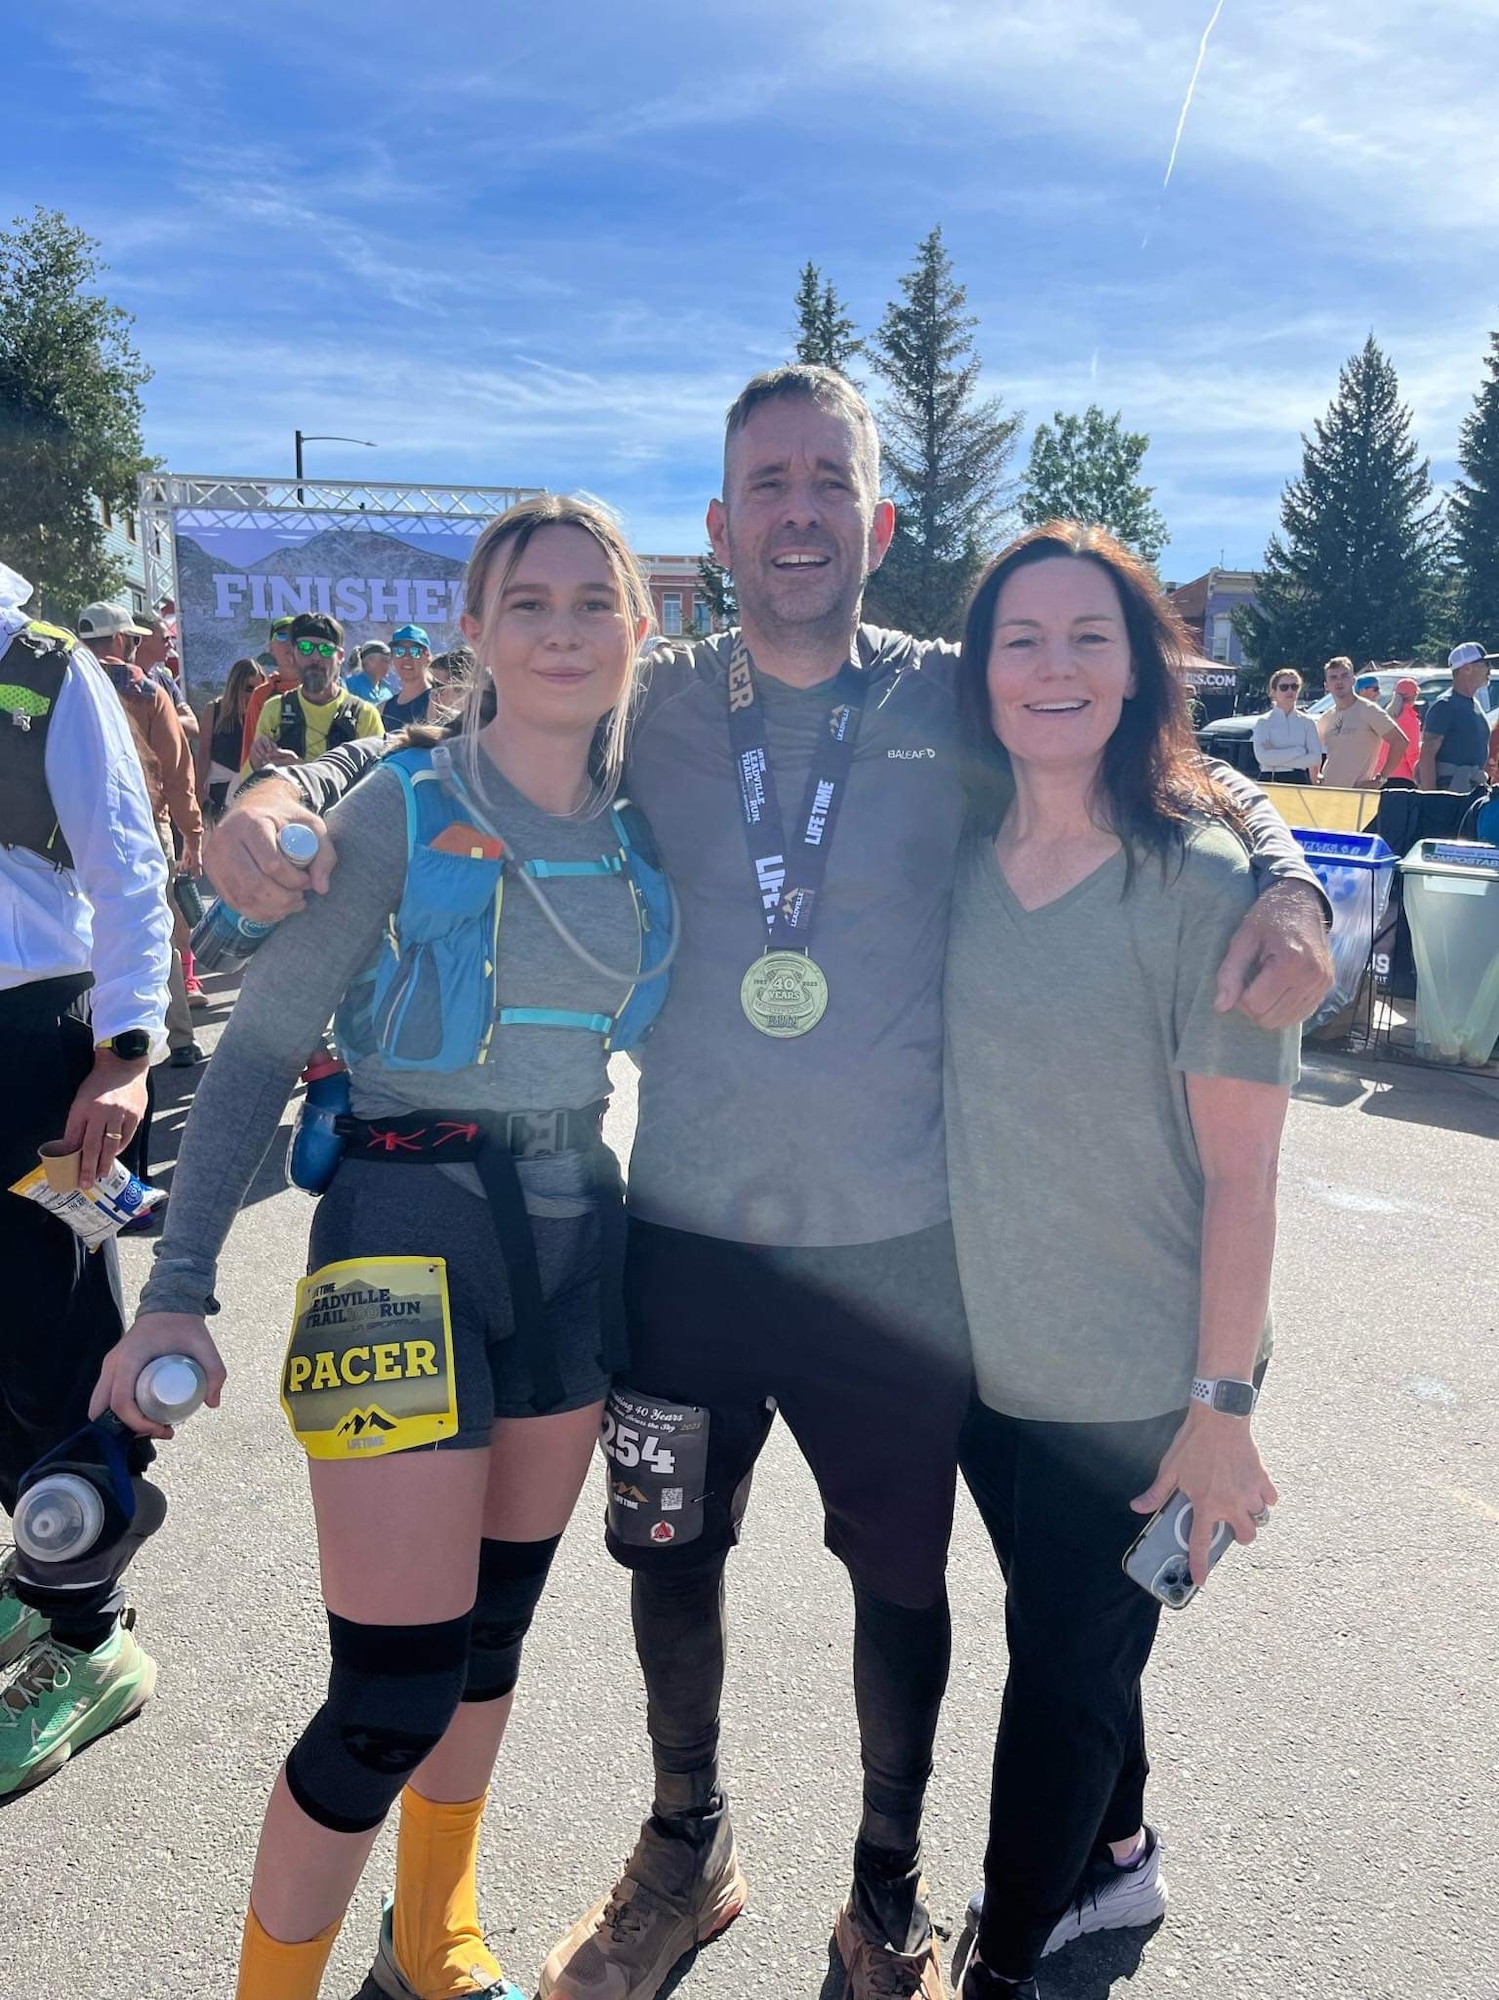 Patrick Buzzard, 4th Test and Evaluation Squadron, center, poses for a photo with his daughter, Hailey Buzzard, left, and his wife, Christine Buzzard, after completing the Leadville Trail 100 Run near Leadville, Colorado, Aug. 20, 2023. The Leadville Trail 100 Run is an ultramarathon held annually on rugged trails and dirt roads through the heart of the Rocky Mountains. The course is a 50-mile out-and-back dogleg run primarily on the Colorado Trail, starting at 10,200 feet. The centerpiece of the course is the climb up to Hope Pass at 12,620 feet, encountered on both the outbound trek and on the return. Buzzard finished the 100-mile course in 29 hours, 48 minutes, and 57 seconds, just beating the 30-hour time limit. (Courtesy photo)